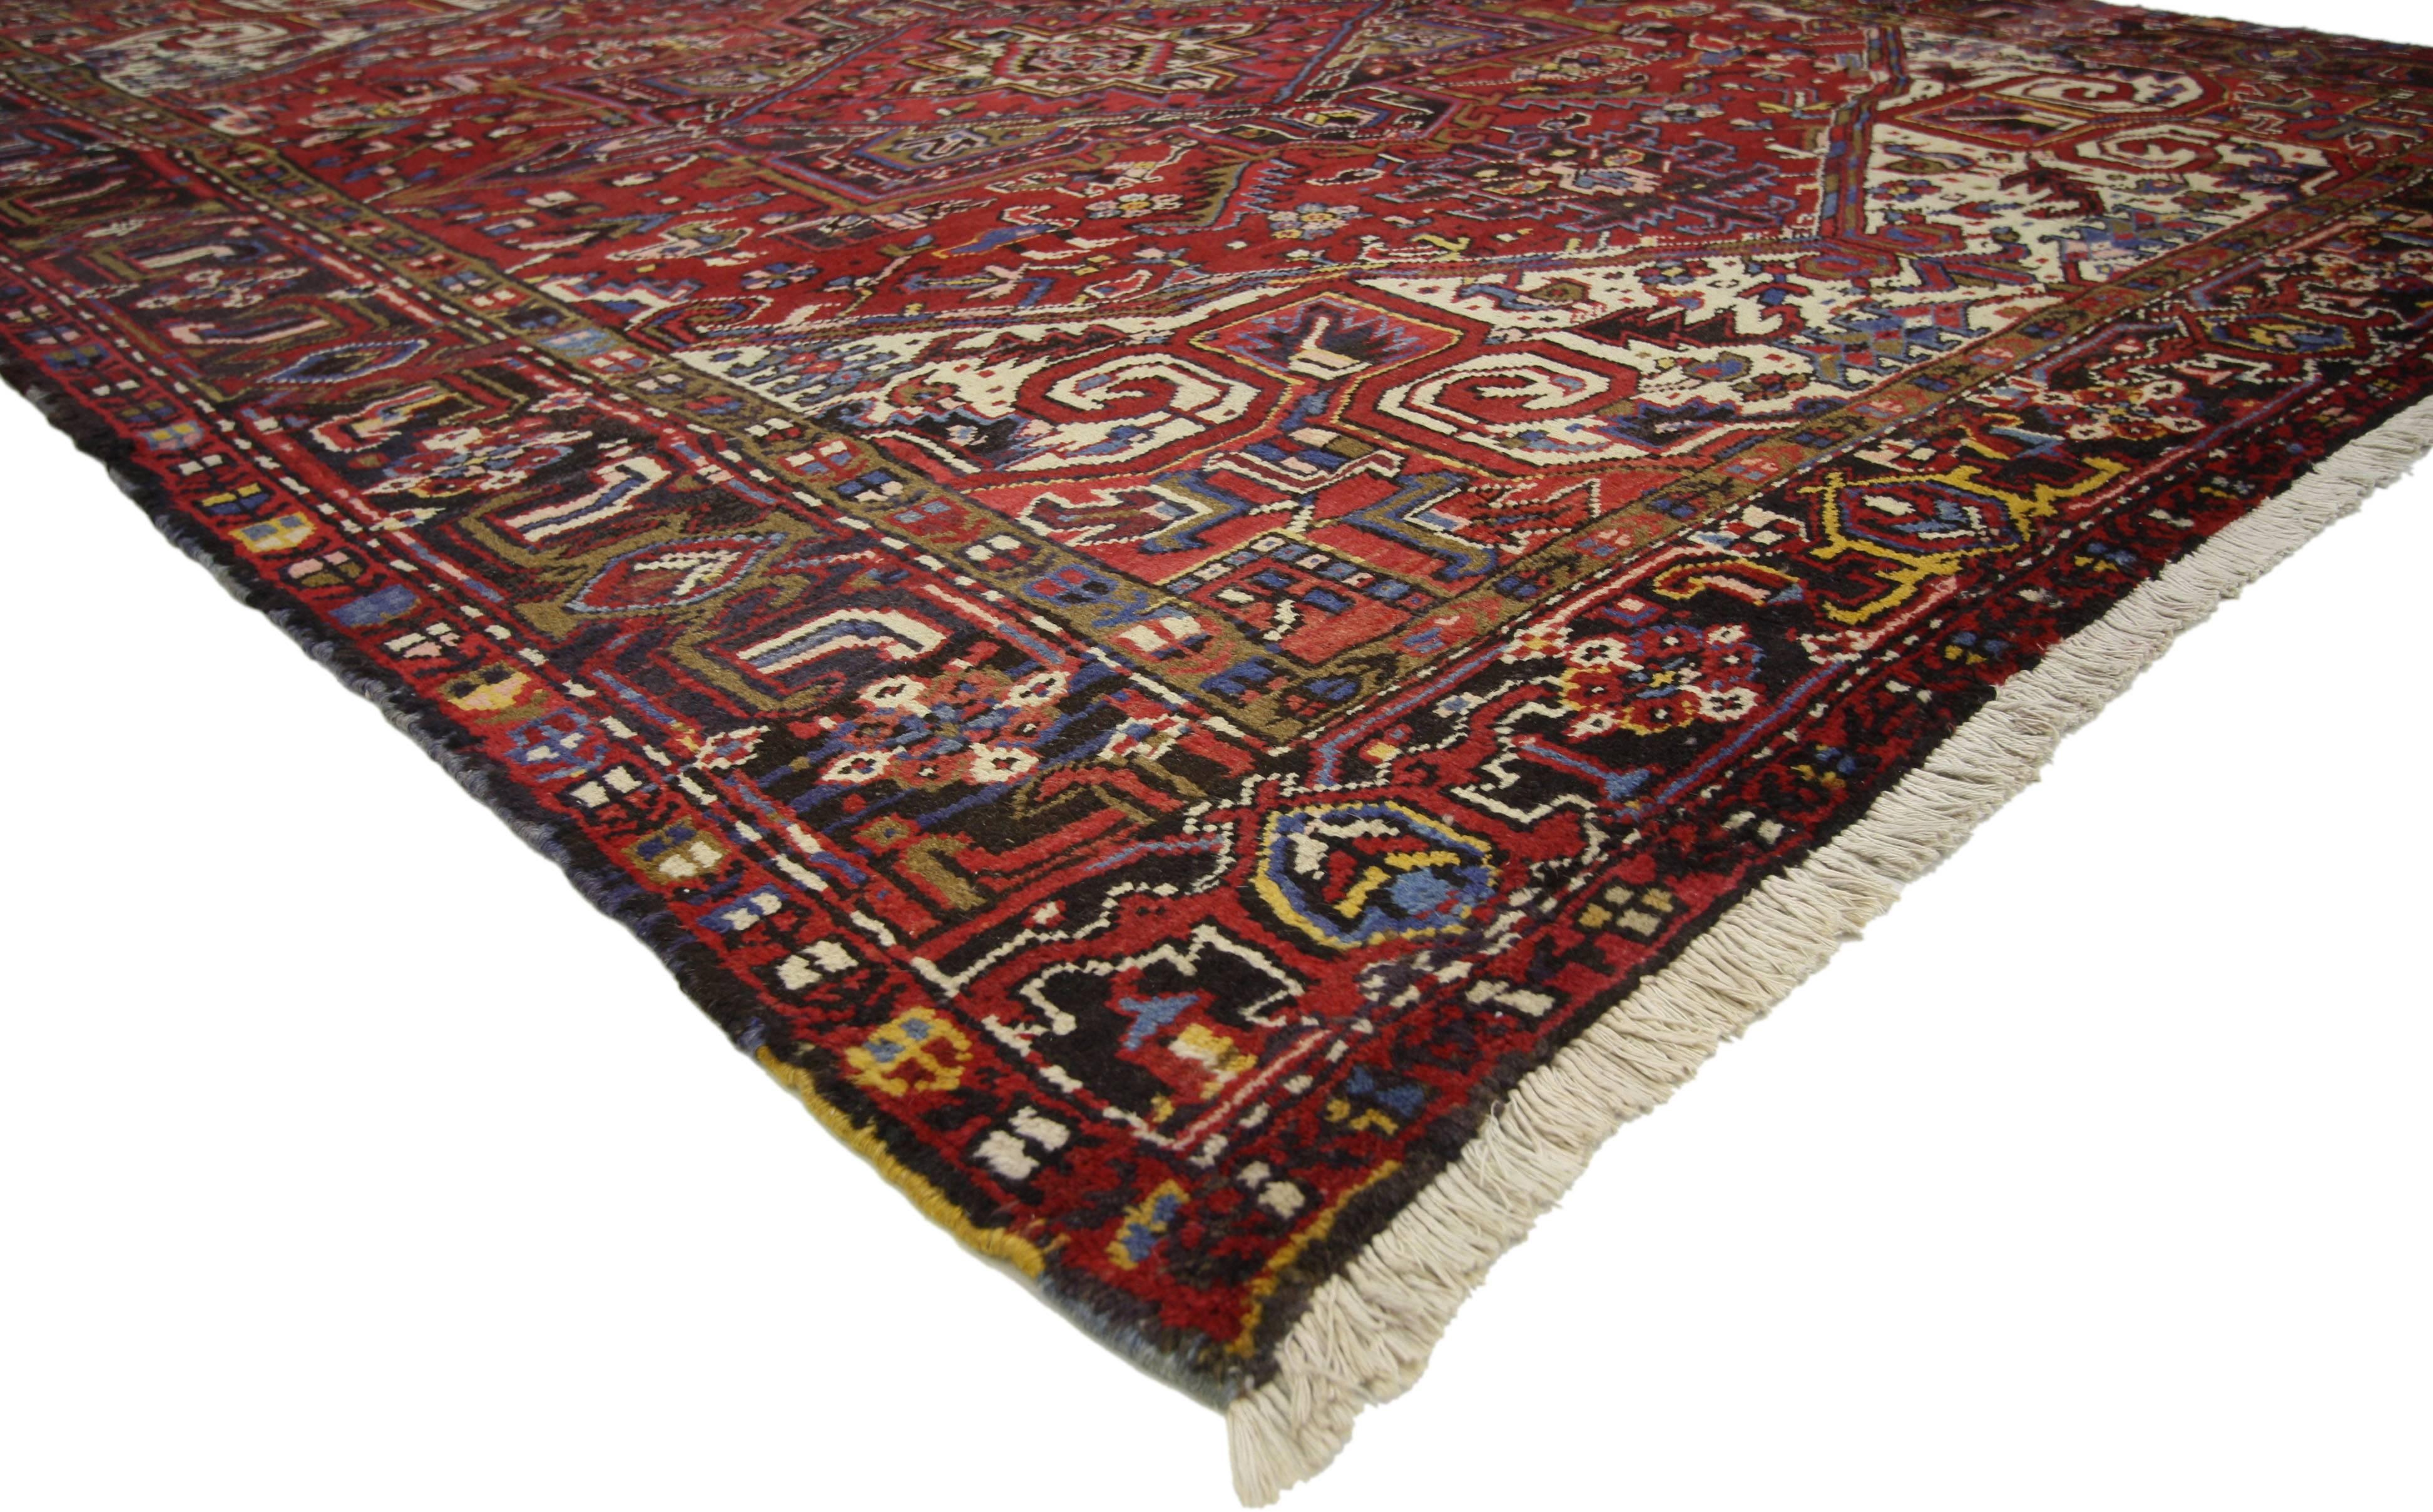 76246 Vintage Persian Heriz Rug with Mid-Century Modern Style 07'07 X 09'11. With its striking appeal and saturated red color palette, this hand-knotted wool vintage Persian Heriz rug appears like a sumptuous Italian velvet, recalling the rich and